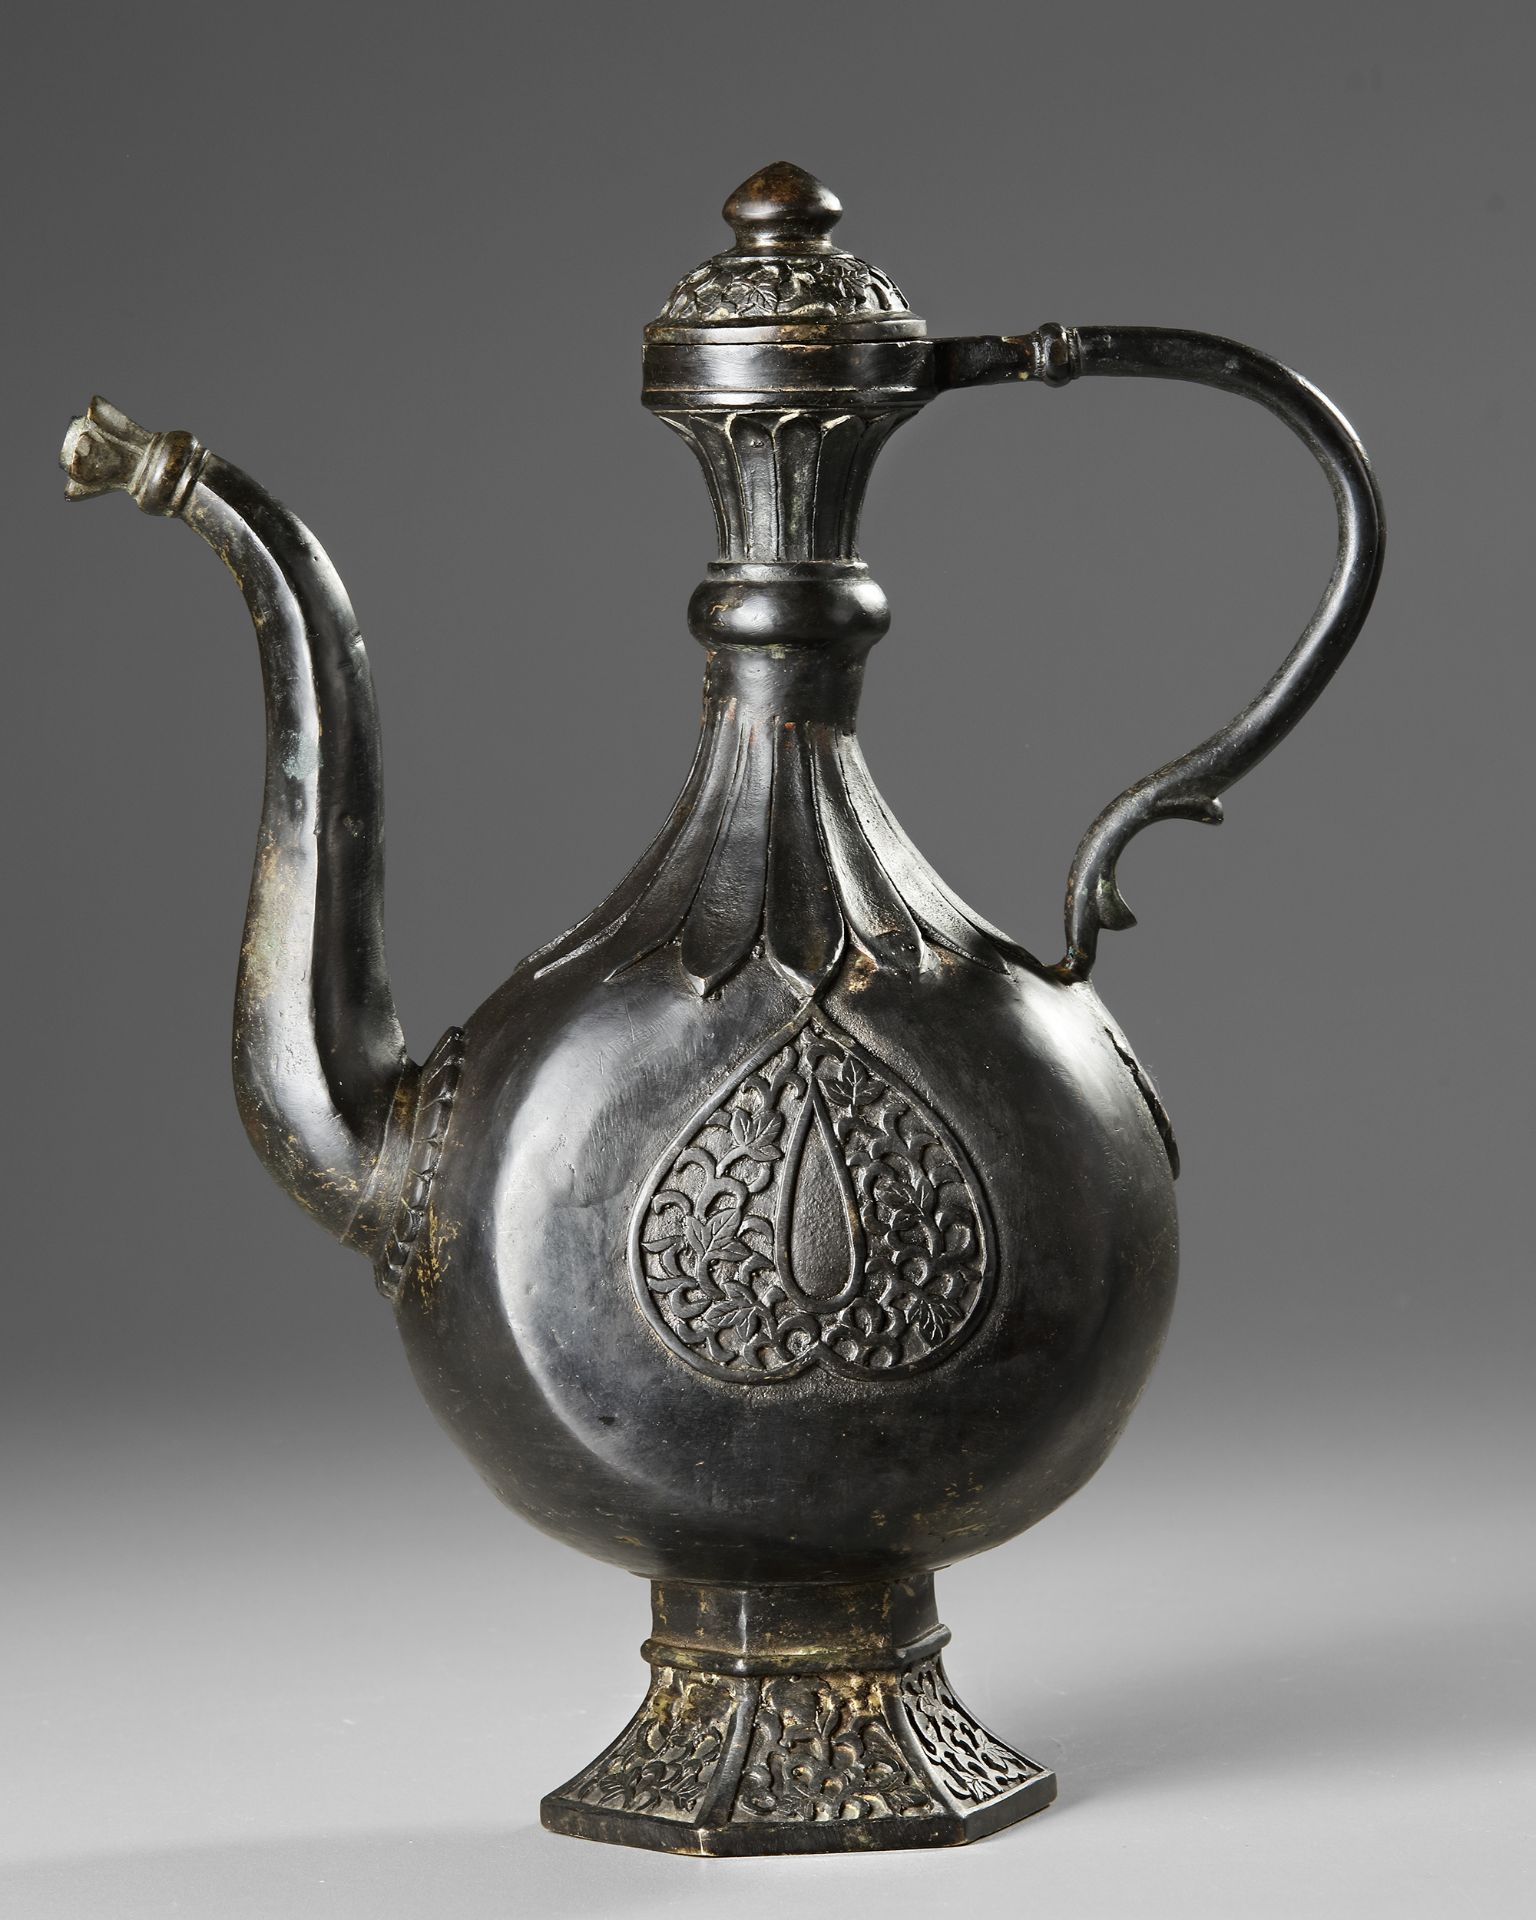 A DECCANI CAST BRASS EWER, INDIA, 17TH CENTURY OR LATER